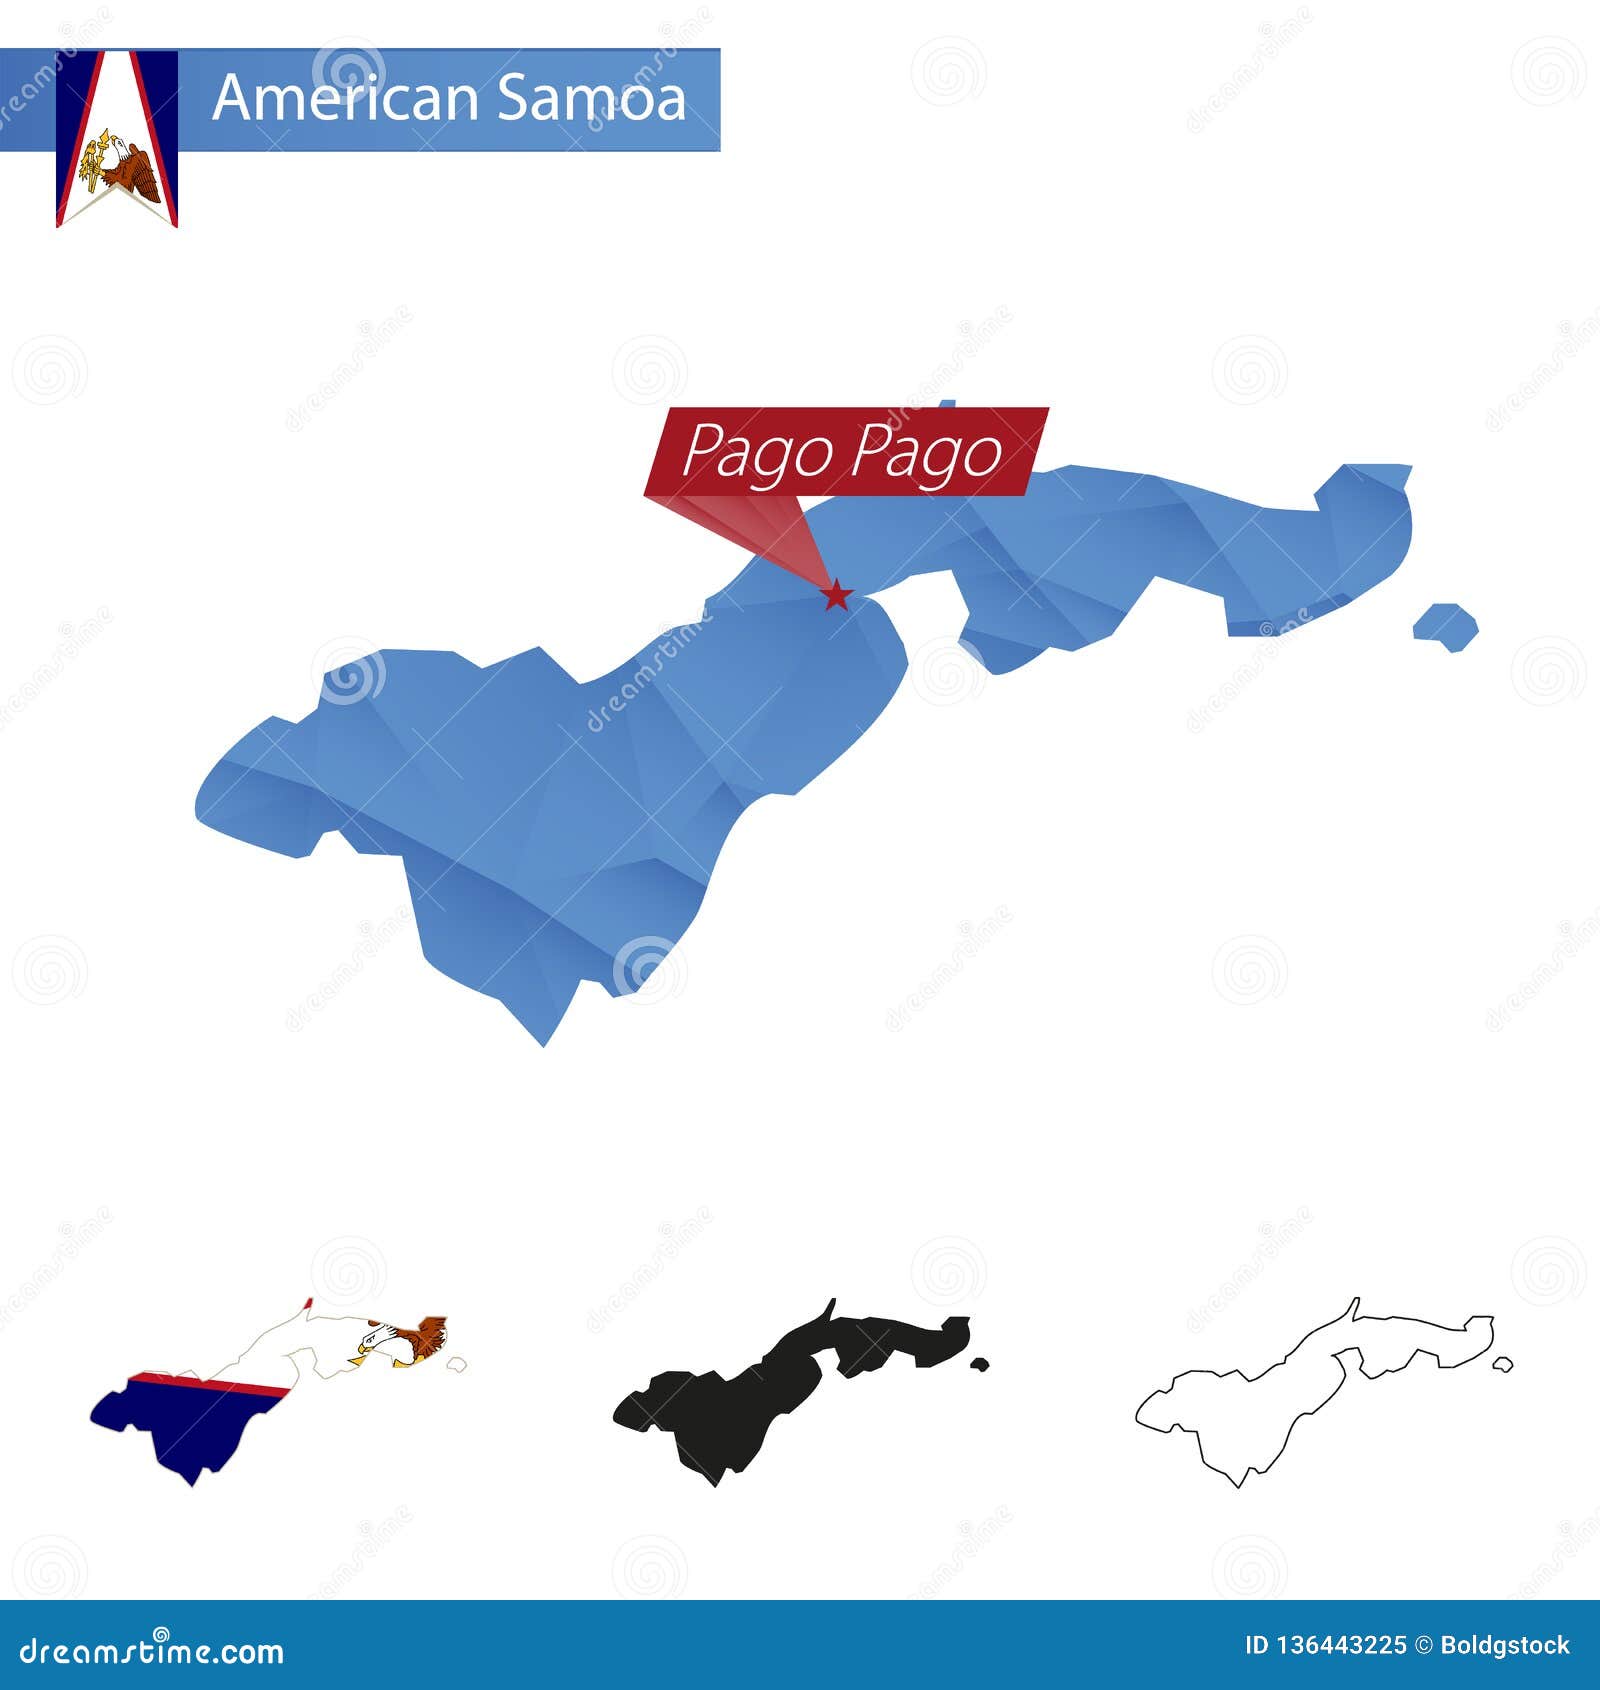 american samoa blue low poly map with capital pago pago